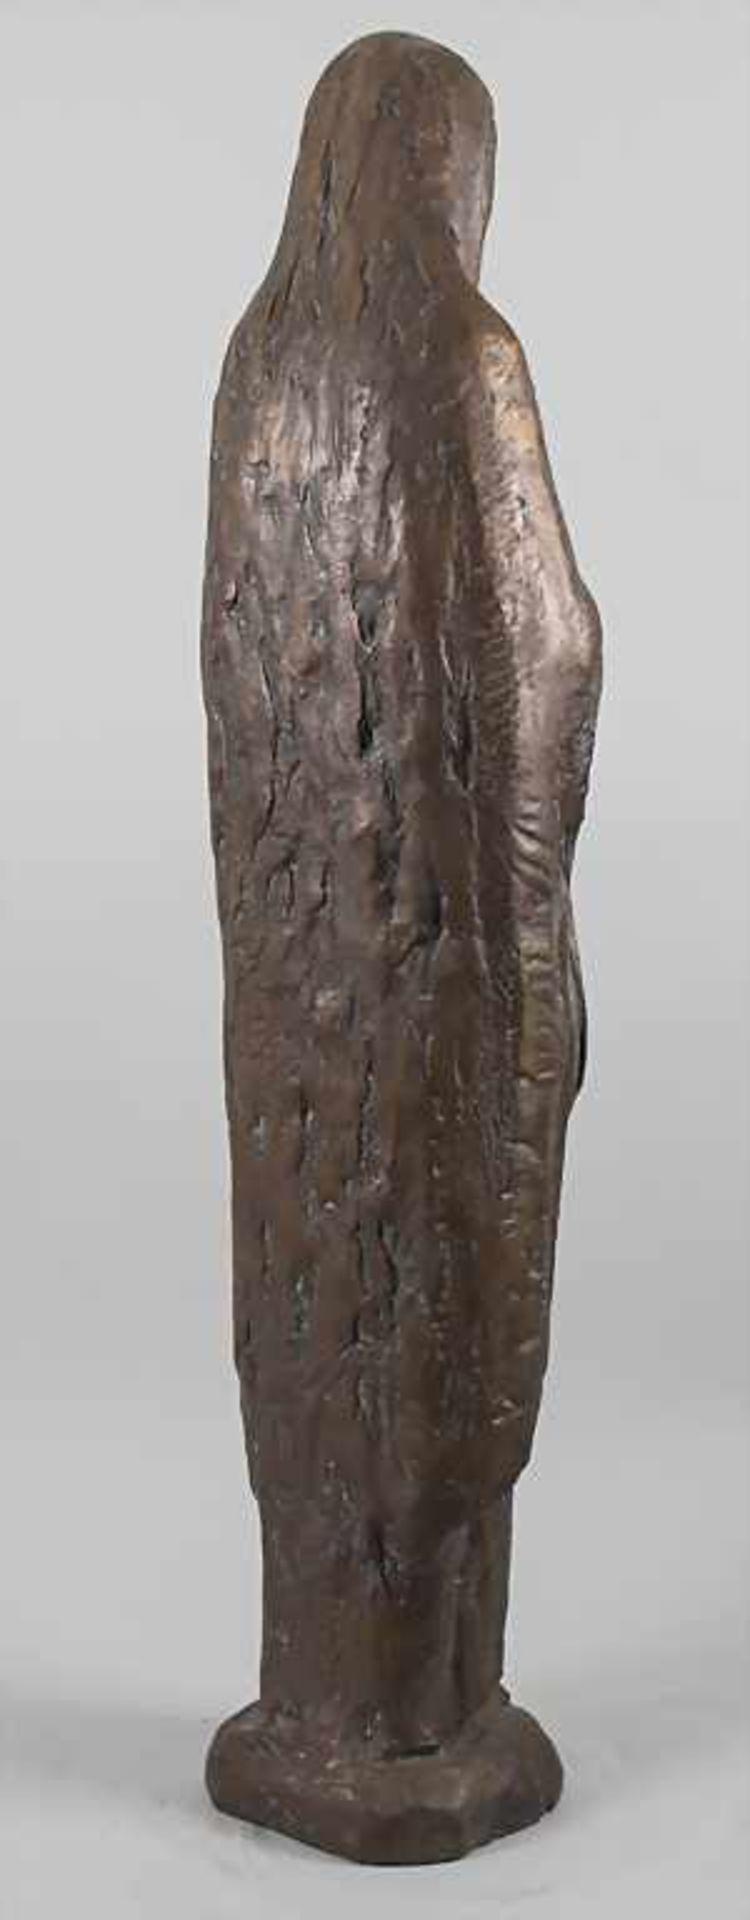 Bronze Skulptur 'Betende Maria' / A bronze sculpture of 'The praying Mary', 20. Jh. - Image 3 of 5